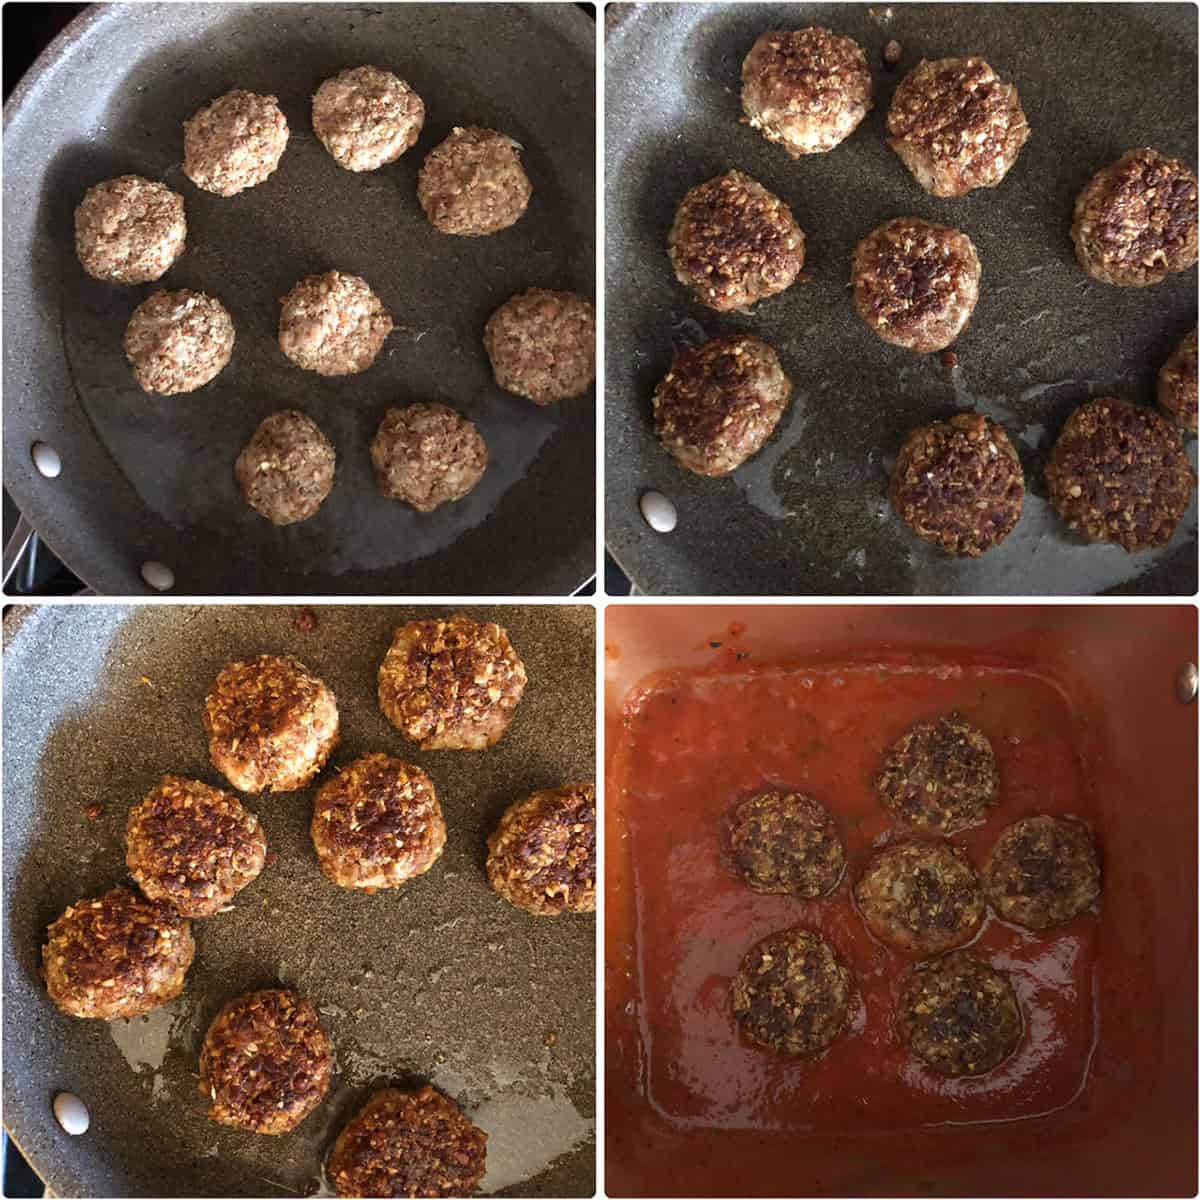 Meatballs being cooked in oil in a skillet until golden. Placed in tomato sauce